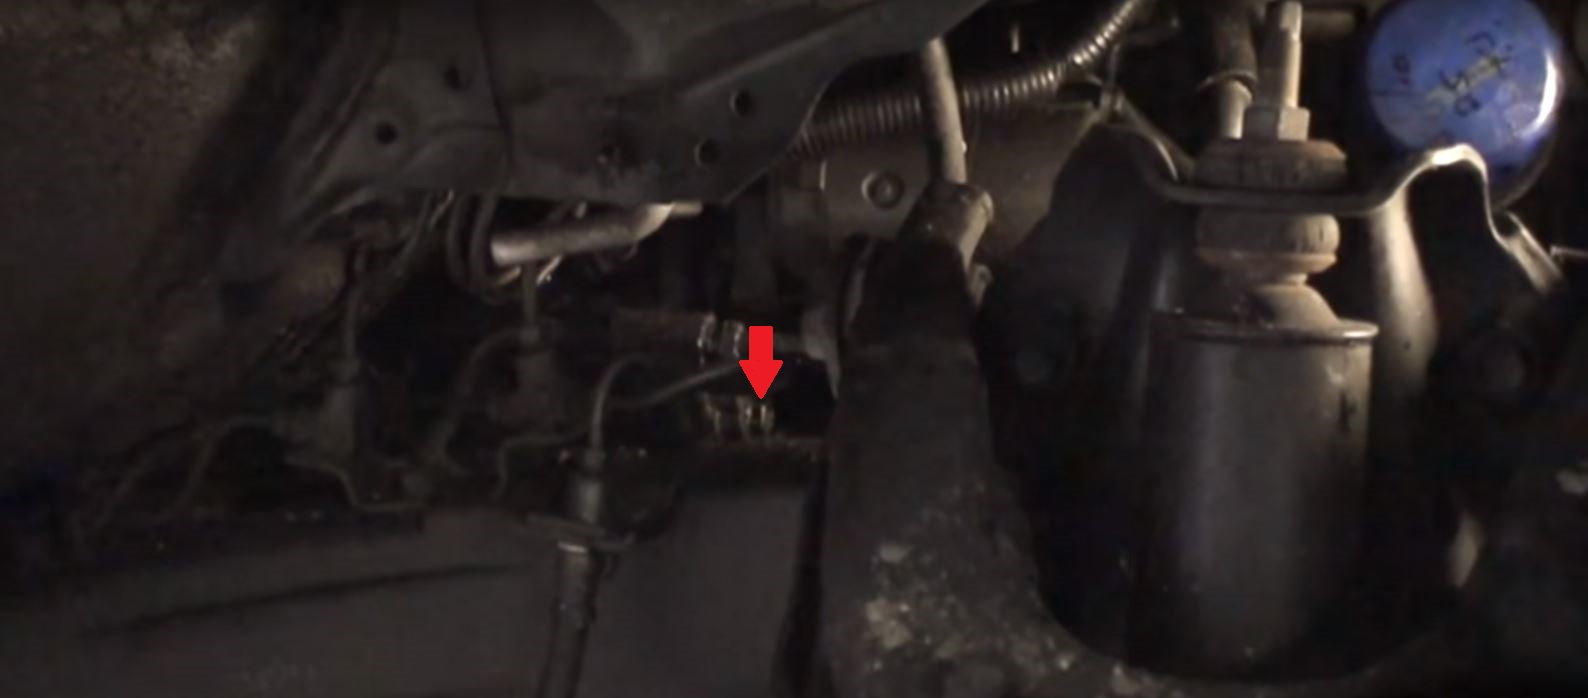 toyota pickup 4runner starter replacement DIY how to remove replace